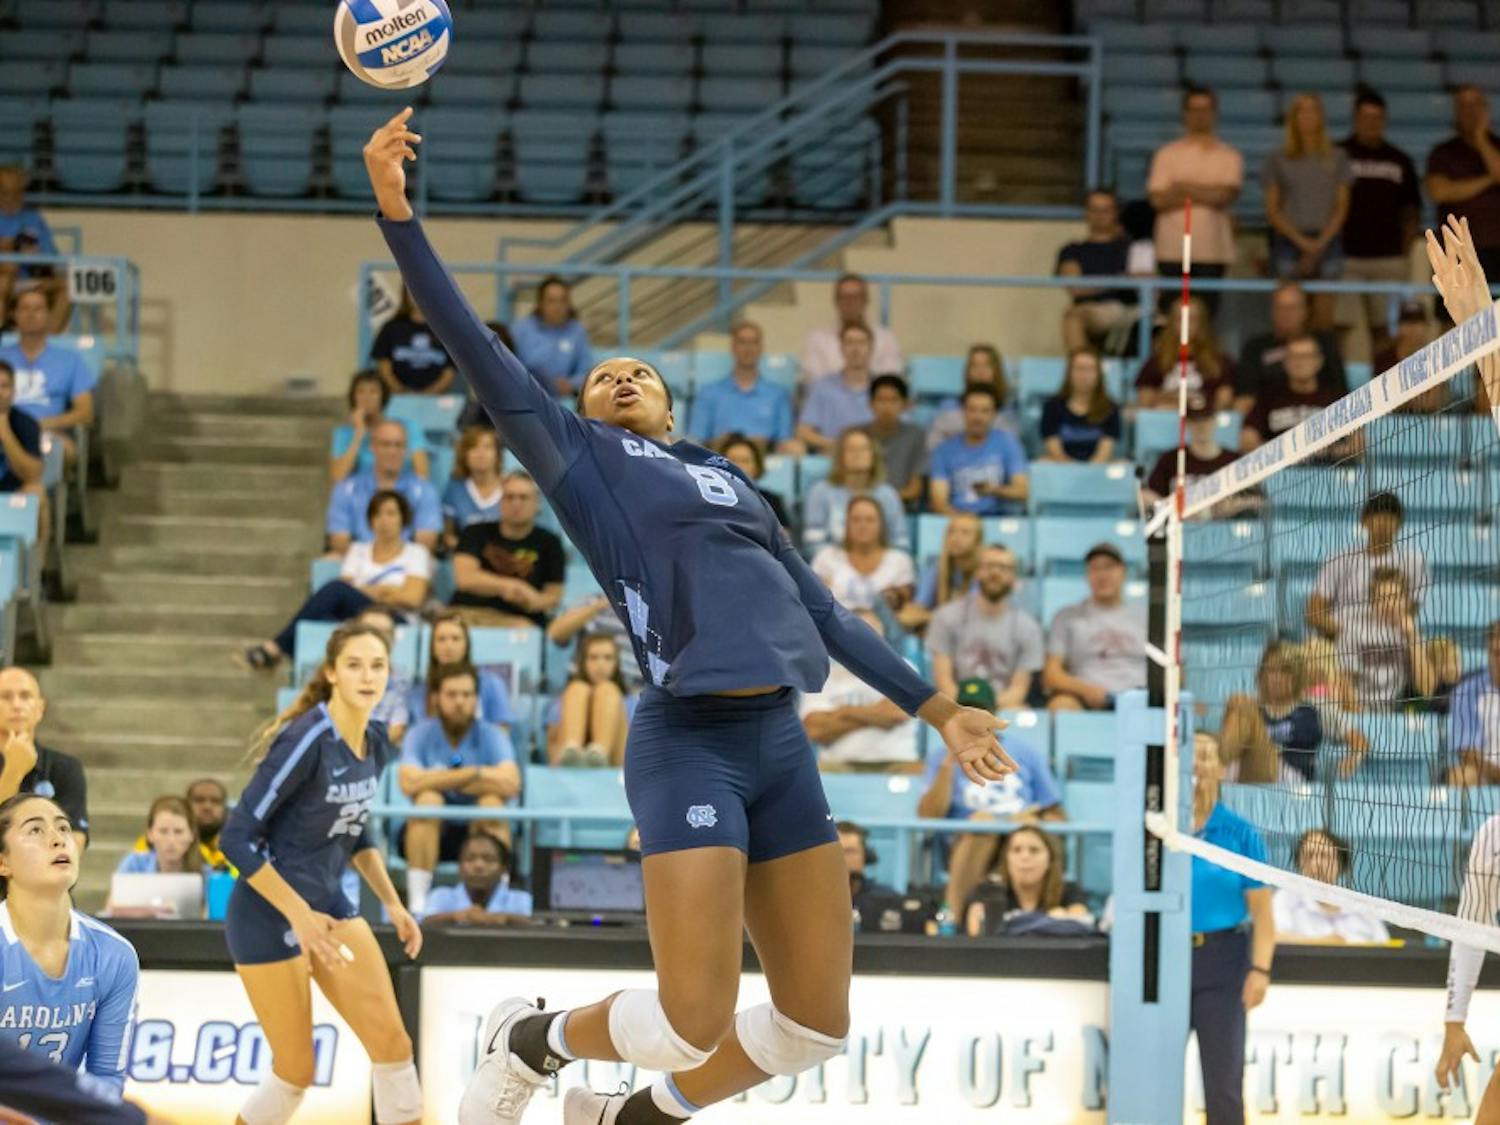 UNC freshman middle blocker Skyy Howard (8) spikes the ball during the Tar Heels' 3-1 win against the Colgate Raiders on Saturday, Sept. 21, 2019 in Carmichael Arena in Chapel Hill.